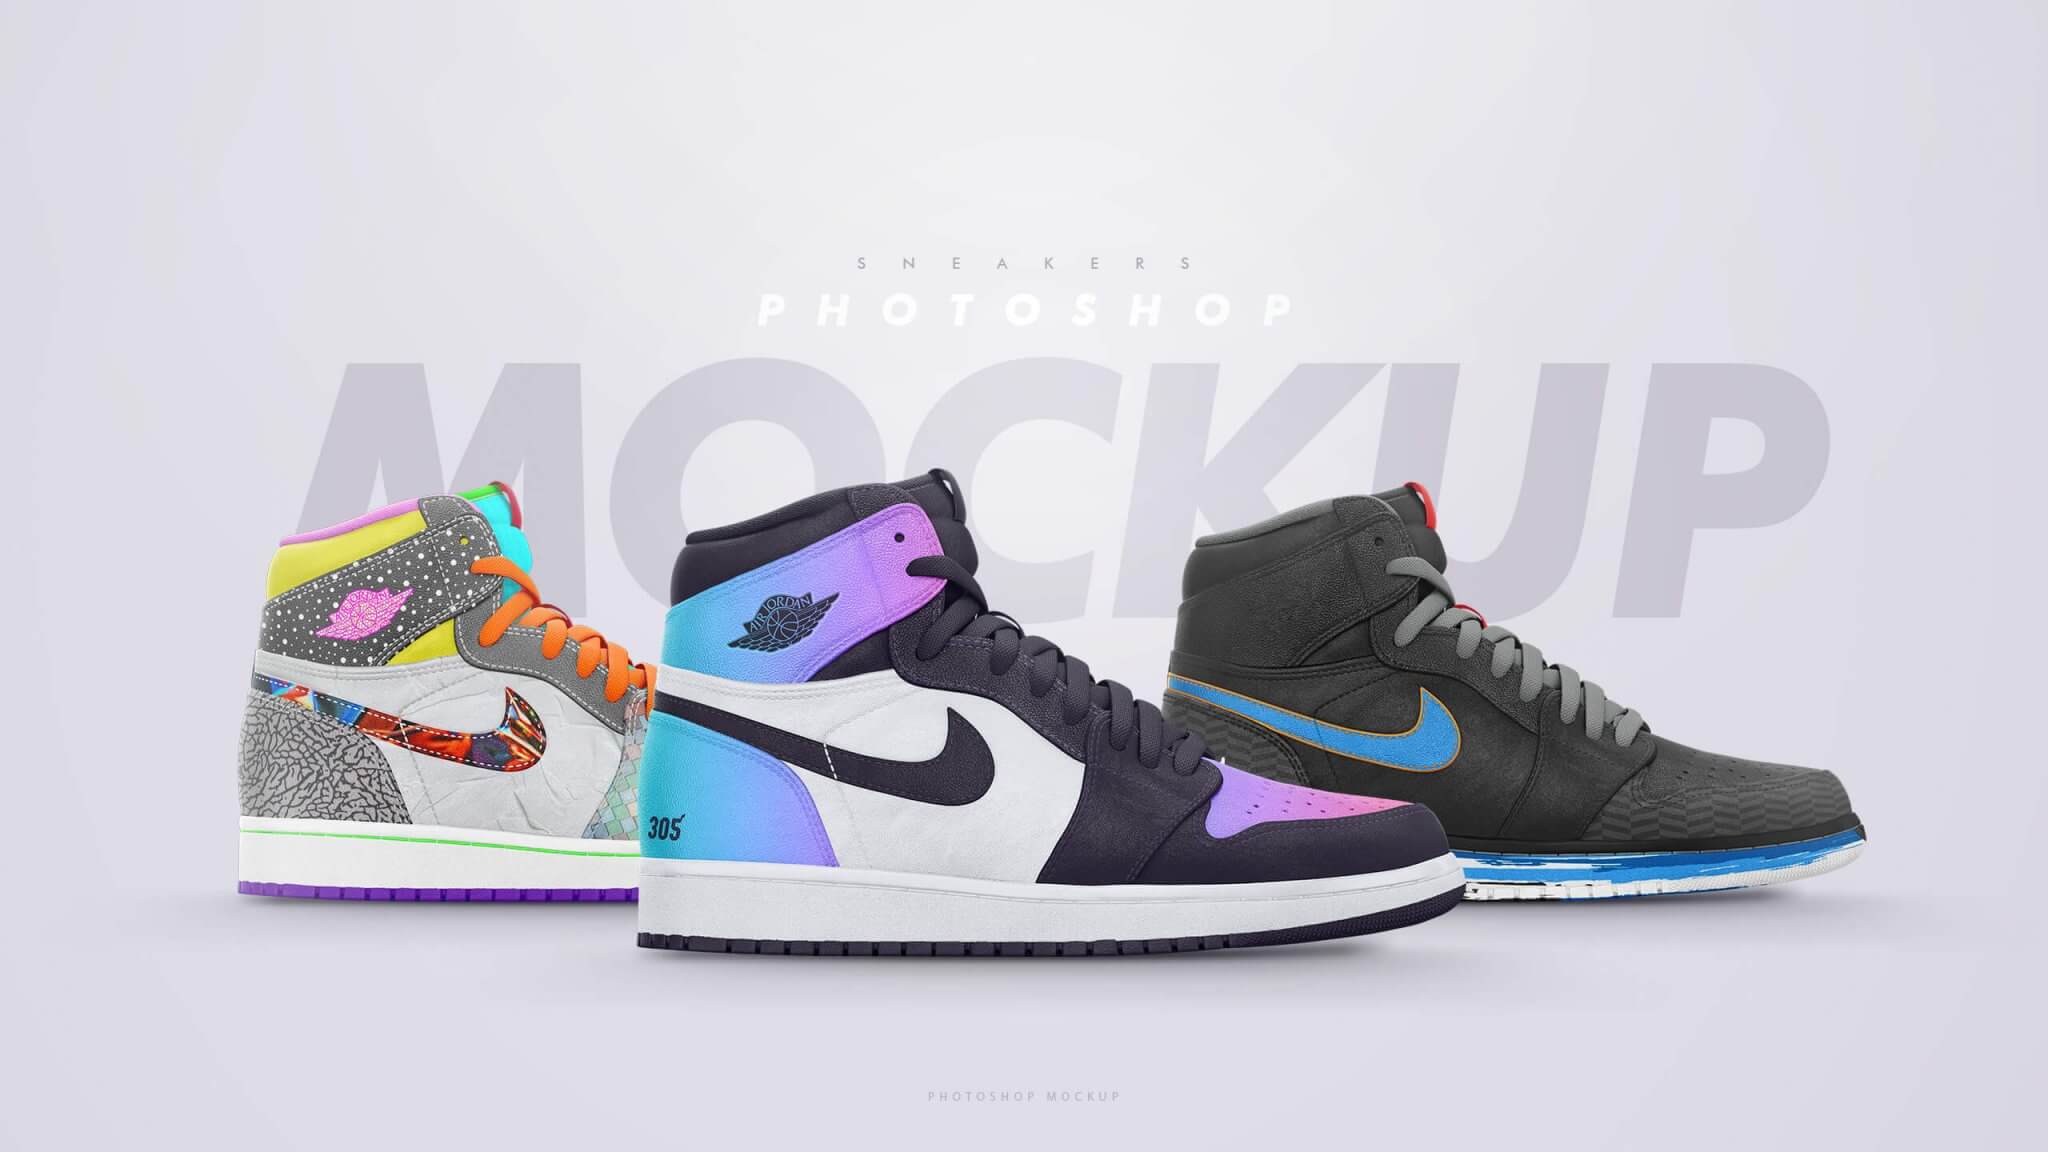 Free: Sneakers Mockup - Free download (PSD) - nohat.cc